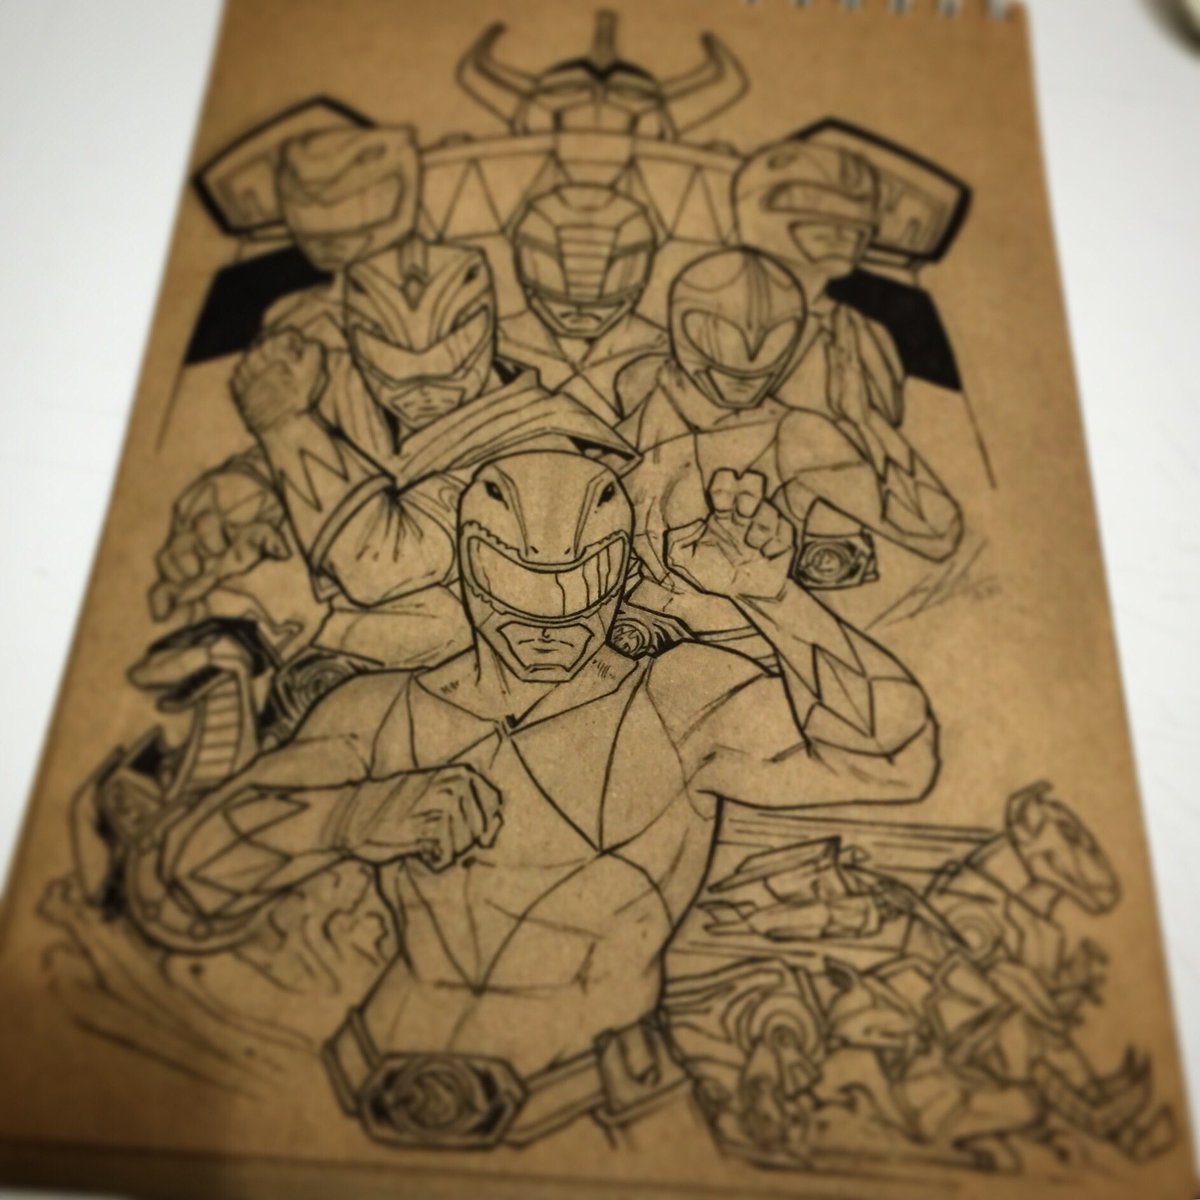 -GO!GO!! POWER⚡️RANGERS!!- Yees!!!🤣🤣in the end I could not resist drawing them, tomorrow it will be time to give color😆 RT
@kirbyscomicart @powerrangers @marvel @marvelspain @imagecomics @valiantentertainment @dynamitecomics #marvel #valiantentertainment #powerrangers #lineart